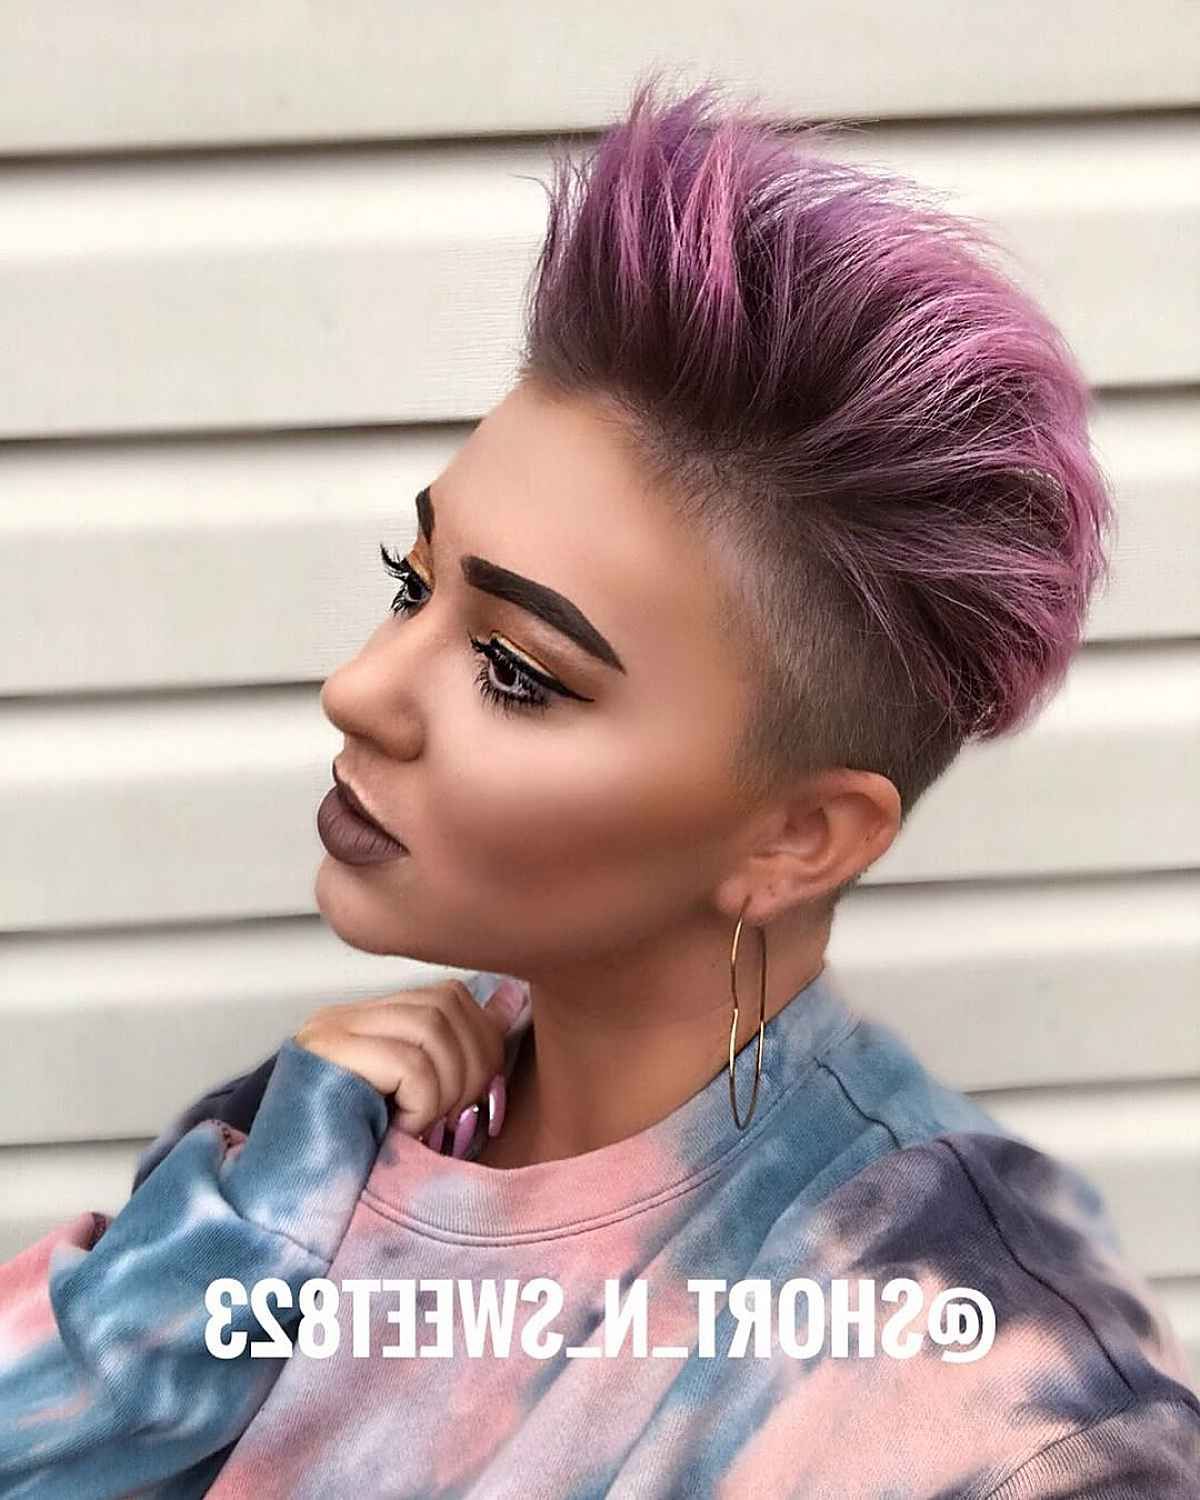 16 Spiky Pixie Cuts For A Bold, Yet Super Cute Look Throughout Blue Punky Pixie Hairstyles With Undercut (View 13 of 25)